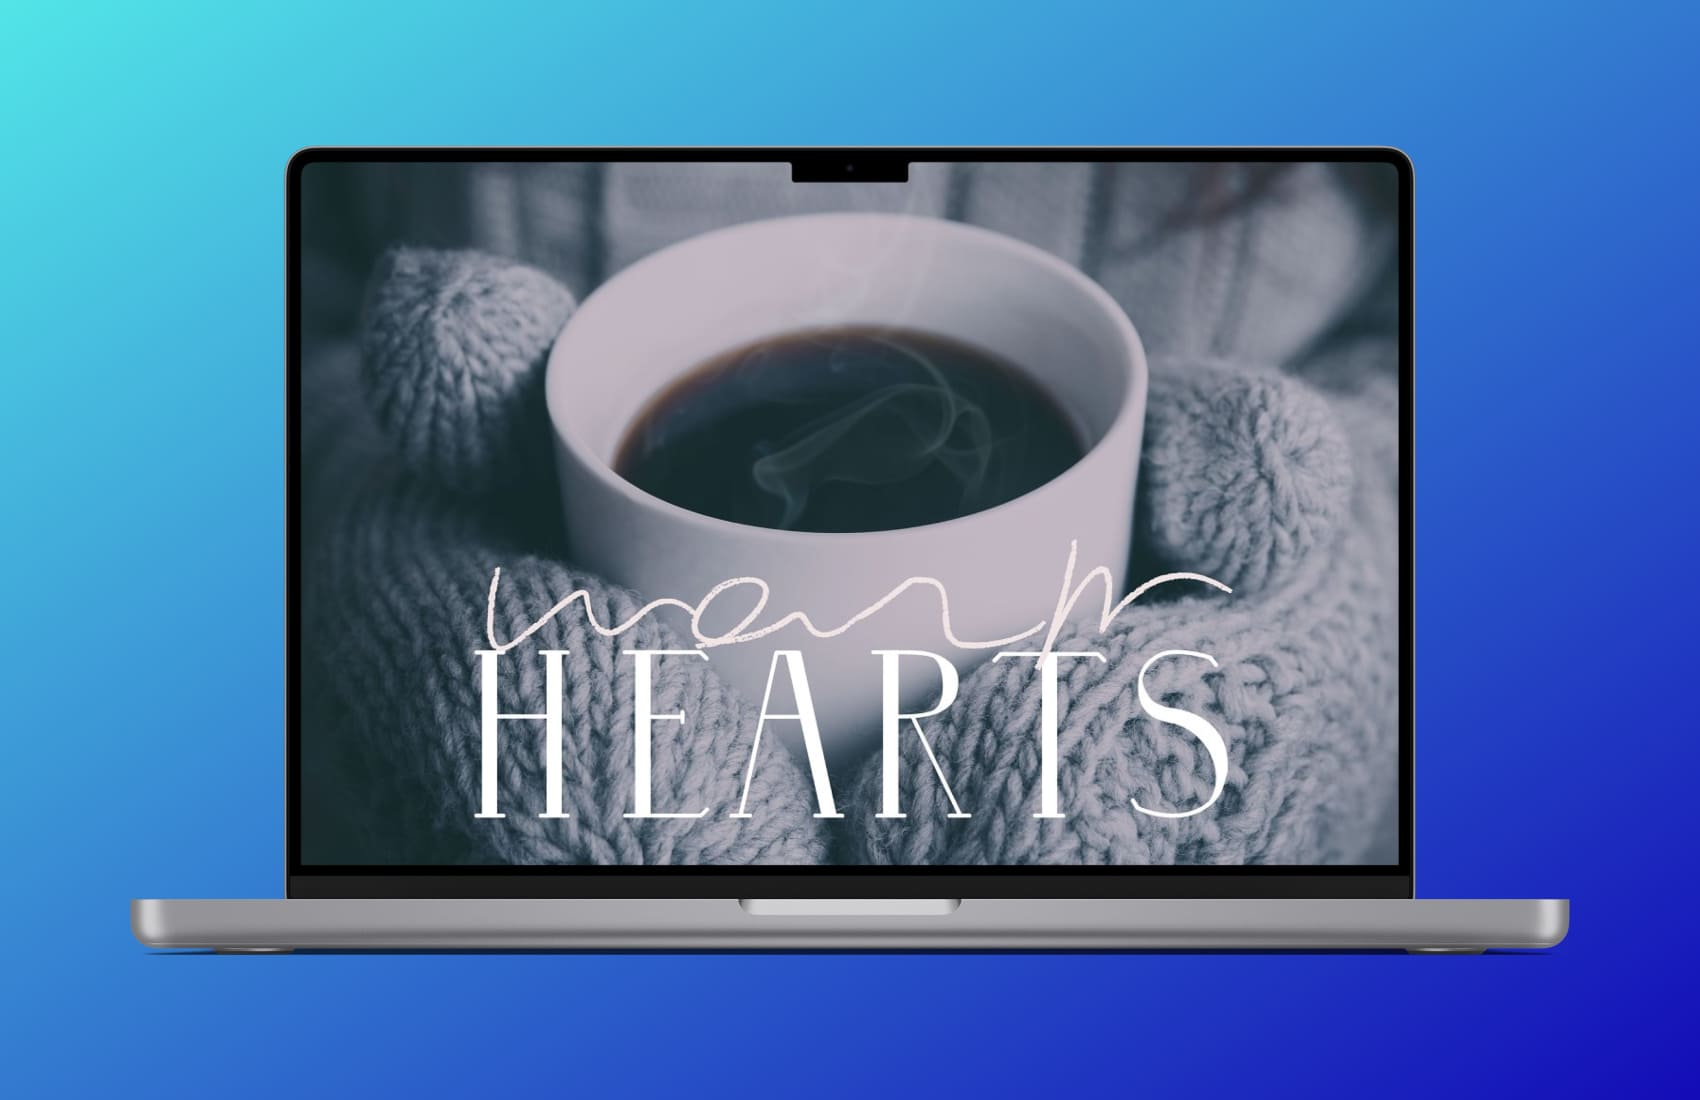 Wintery - A Serif Font Family, "Warm Hearts" On The Laptop.